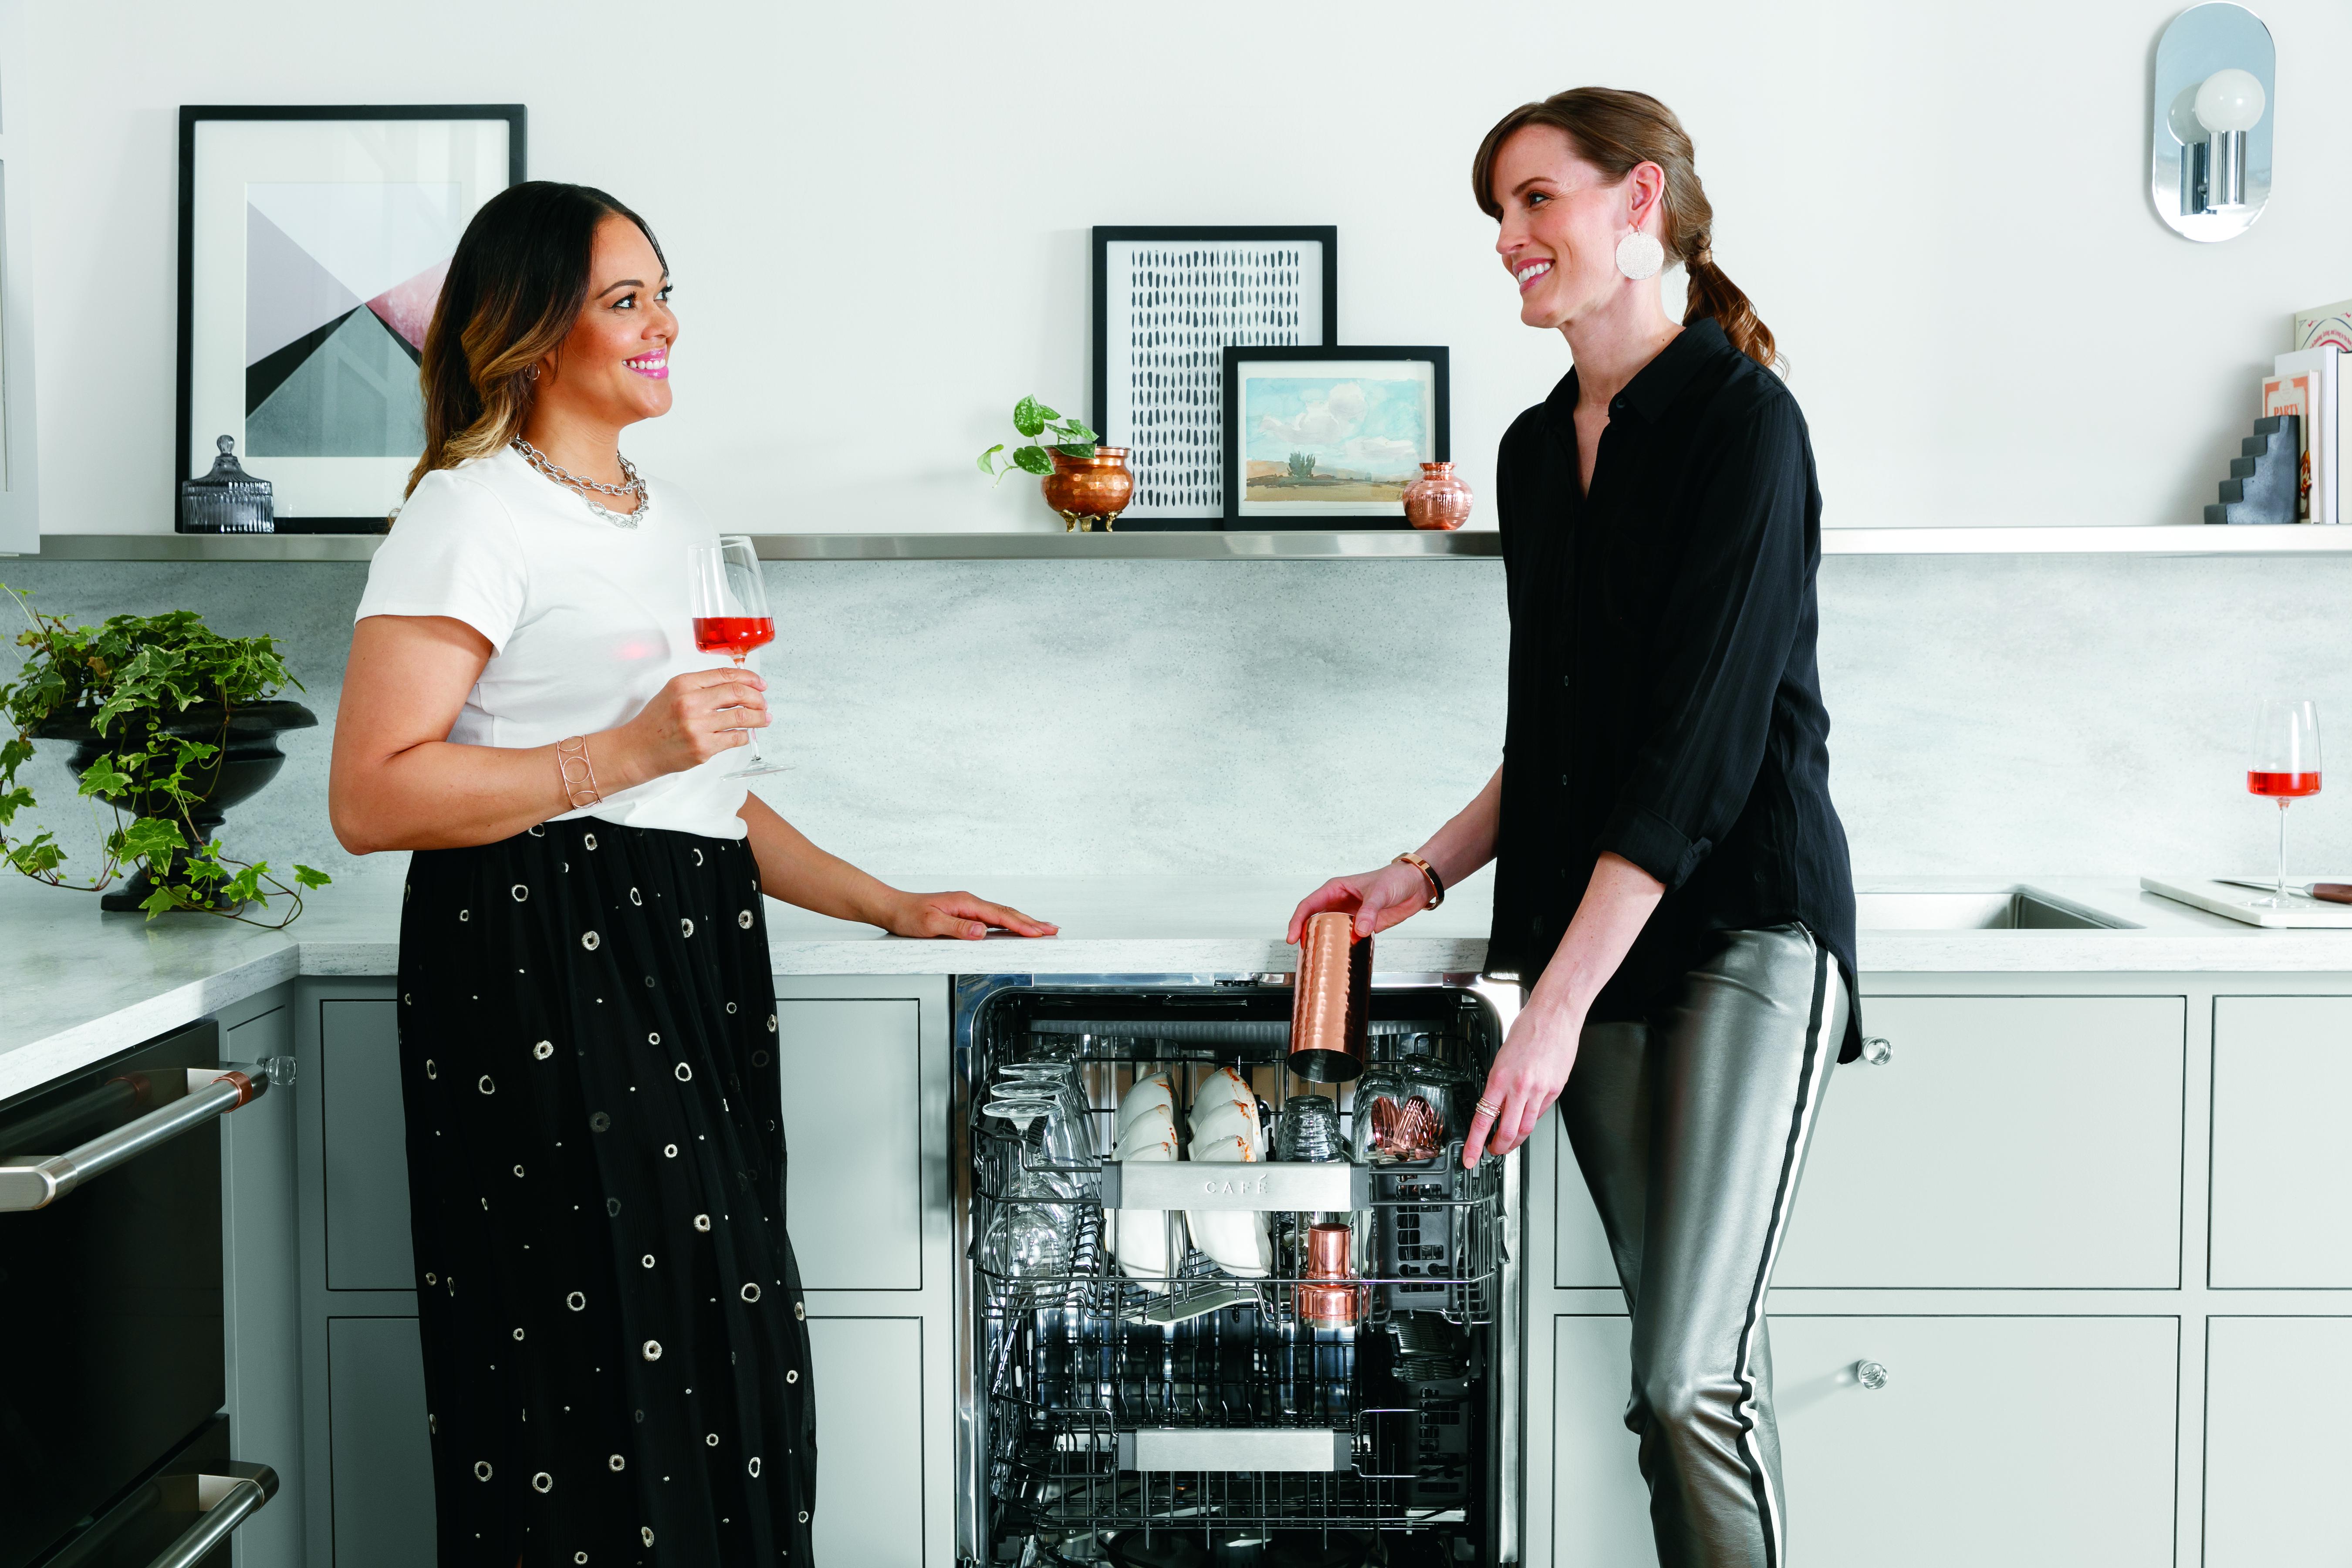 two women socialize as they unload a Café built-in dishwasher